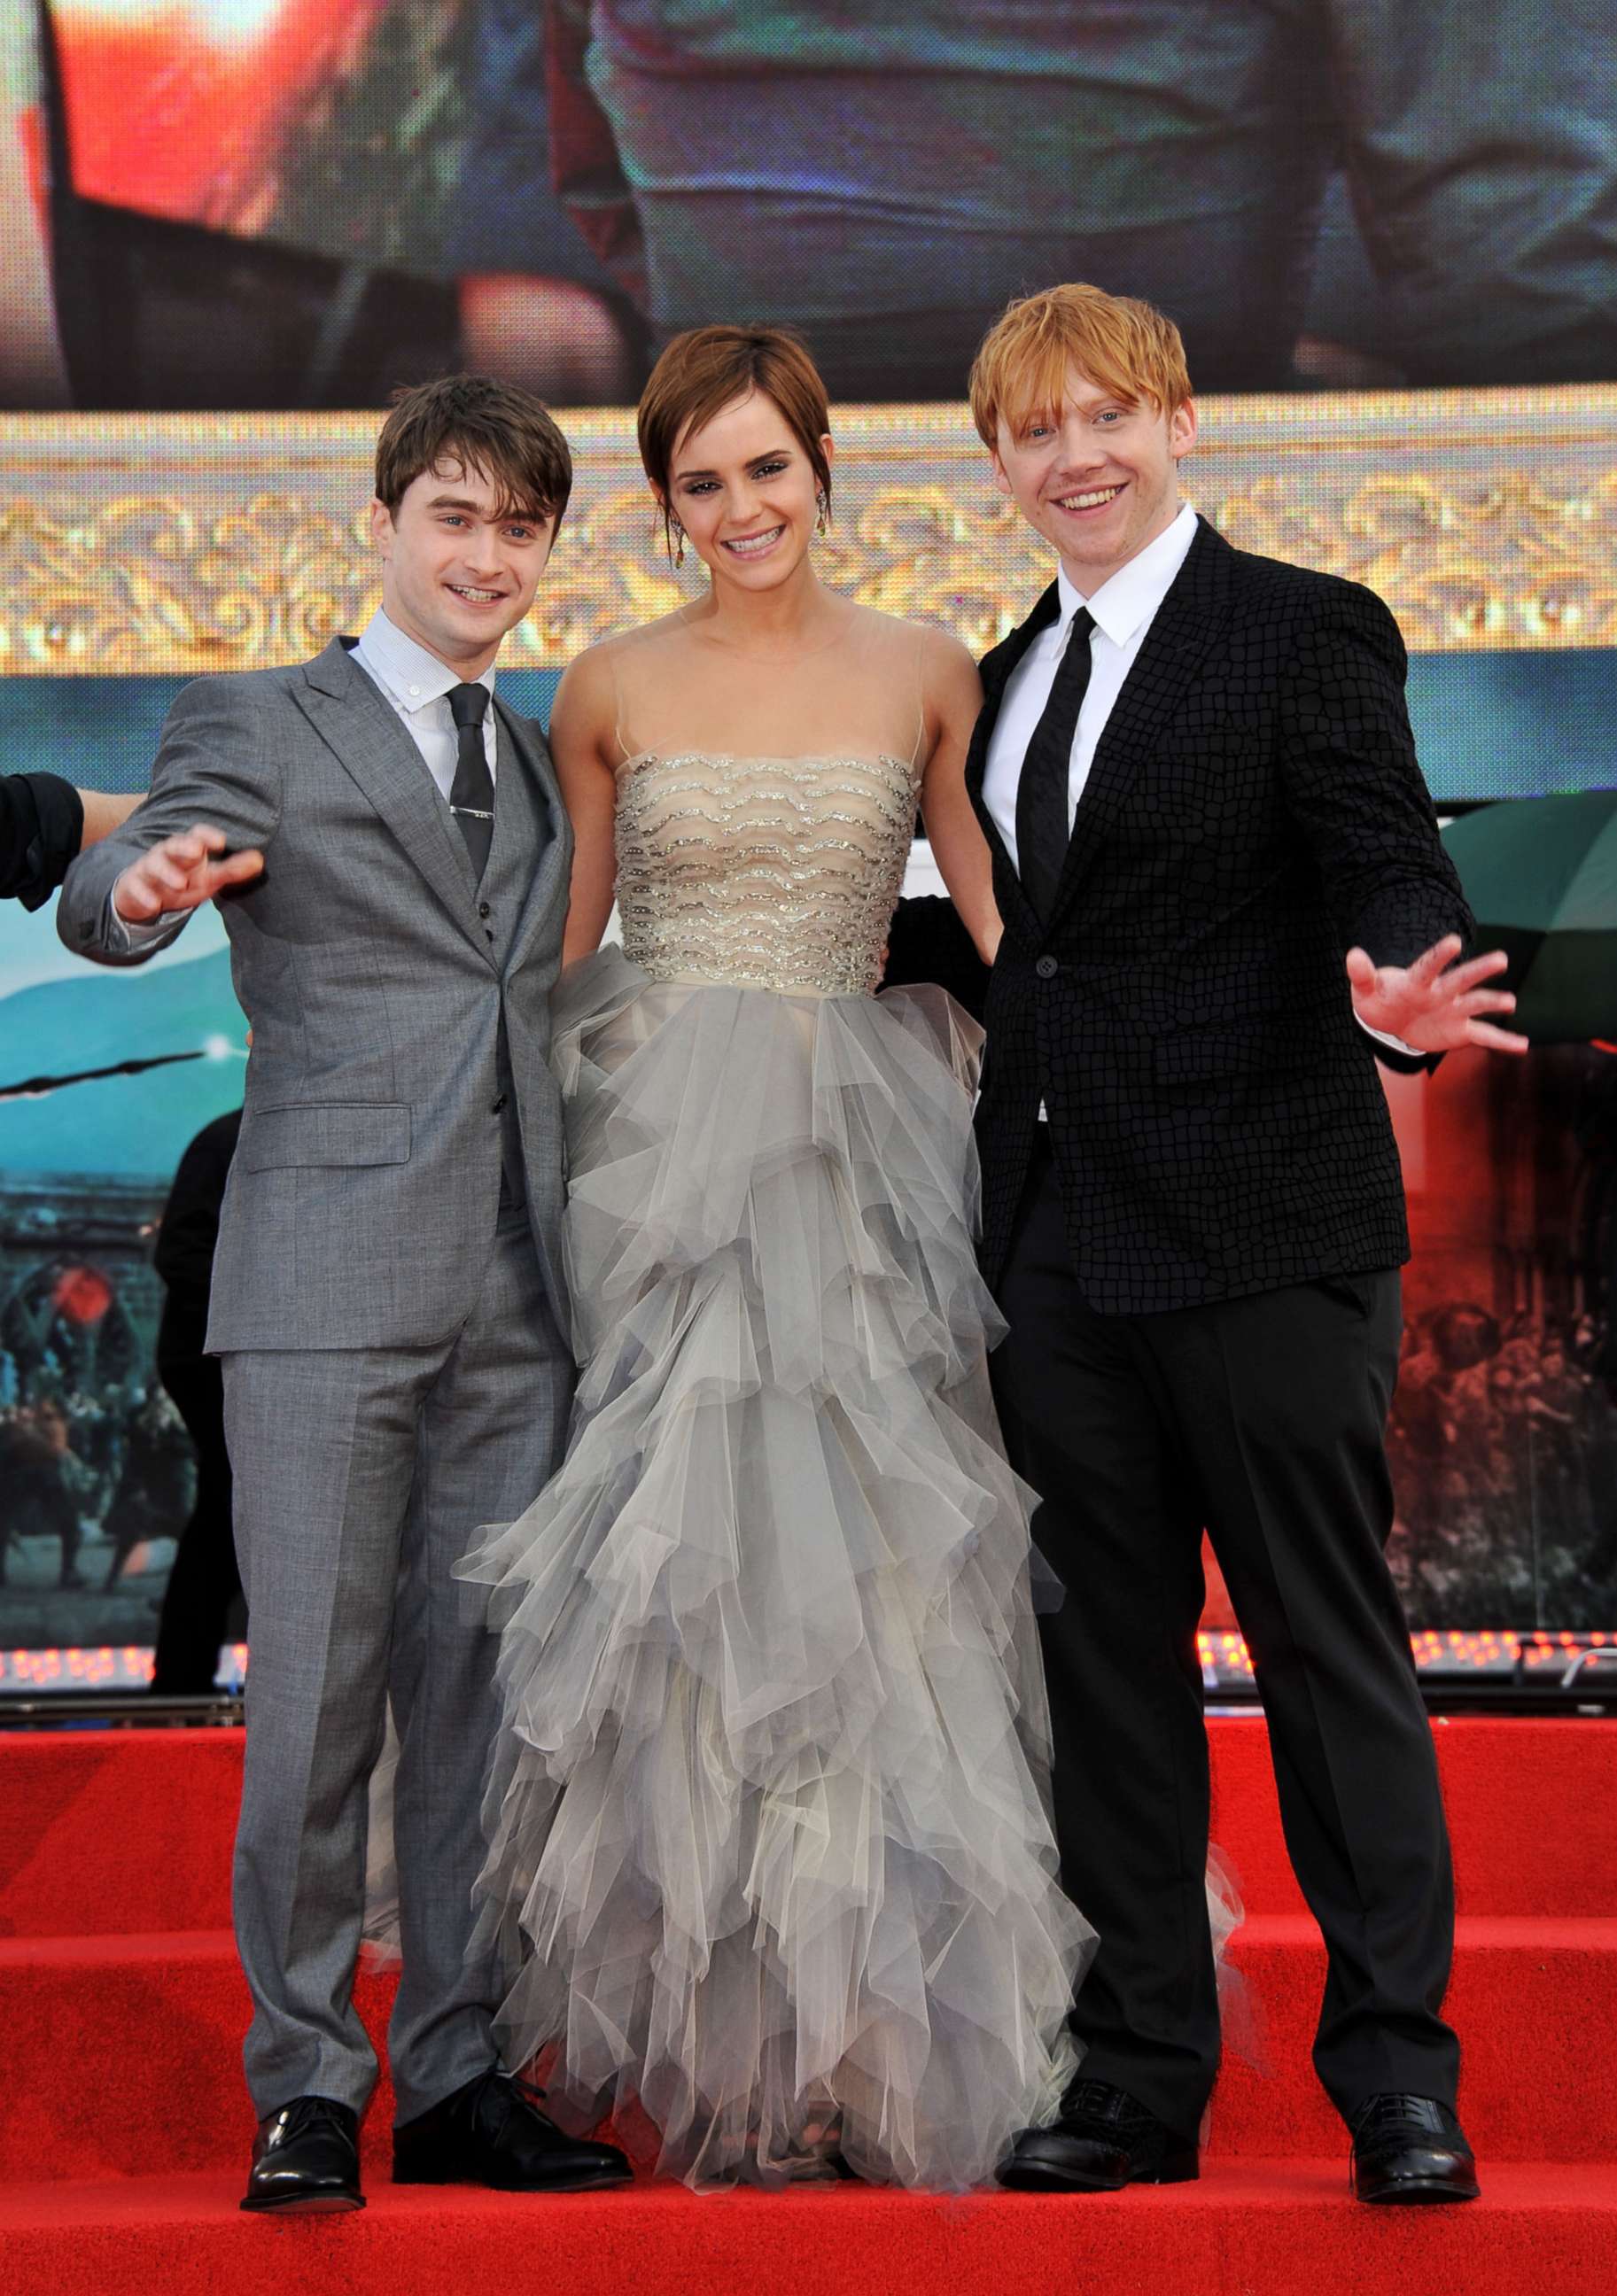 PHOTO: Actor Daniel Radcliffe, actress Emma Watson and actor  Rupert Grint attend the "Harry Potter And The Deathly Hallows Part 2" world premiere at Trafalgar Square, July 7, 2011, in London.